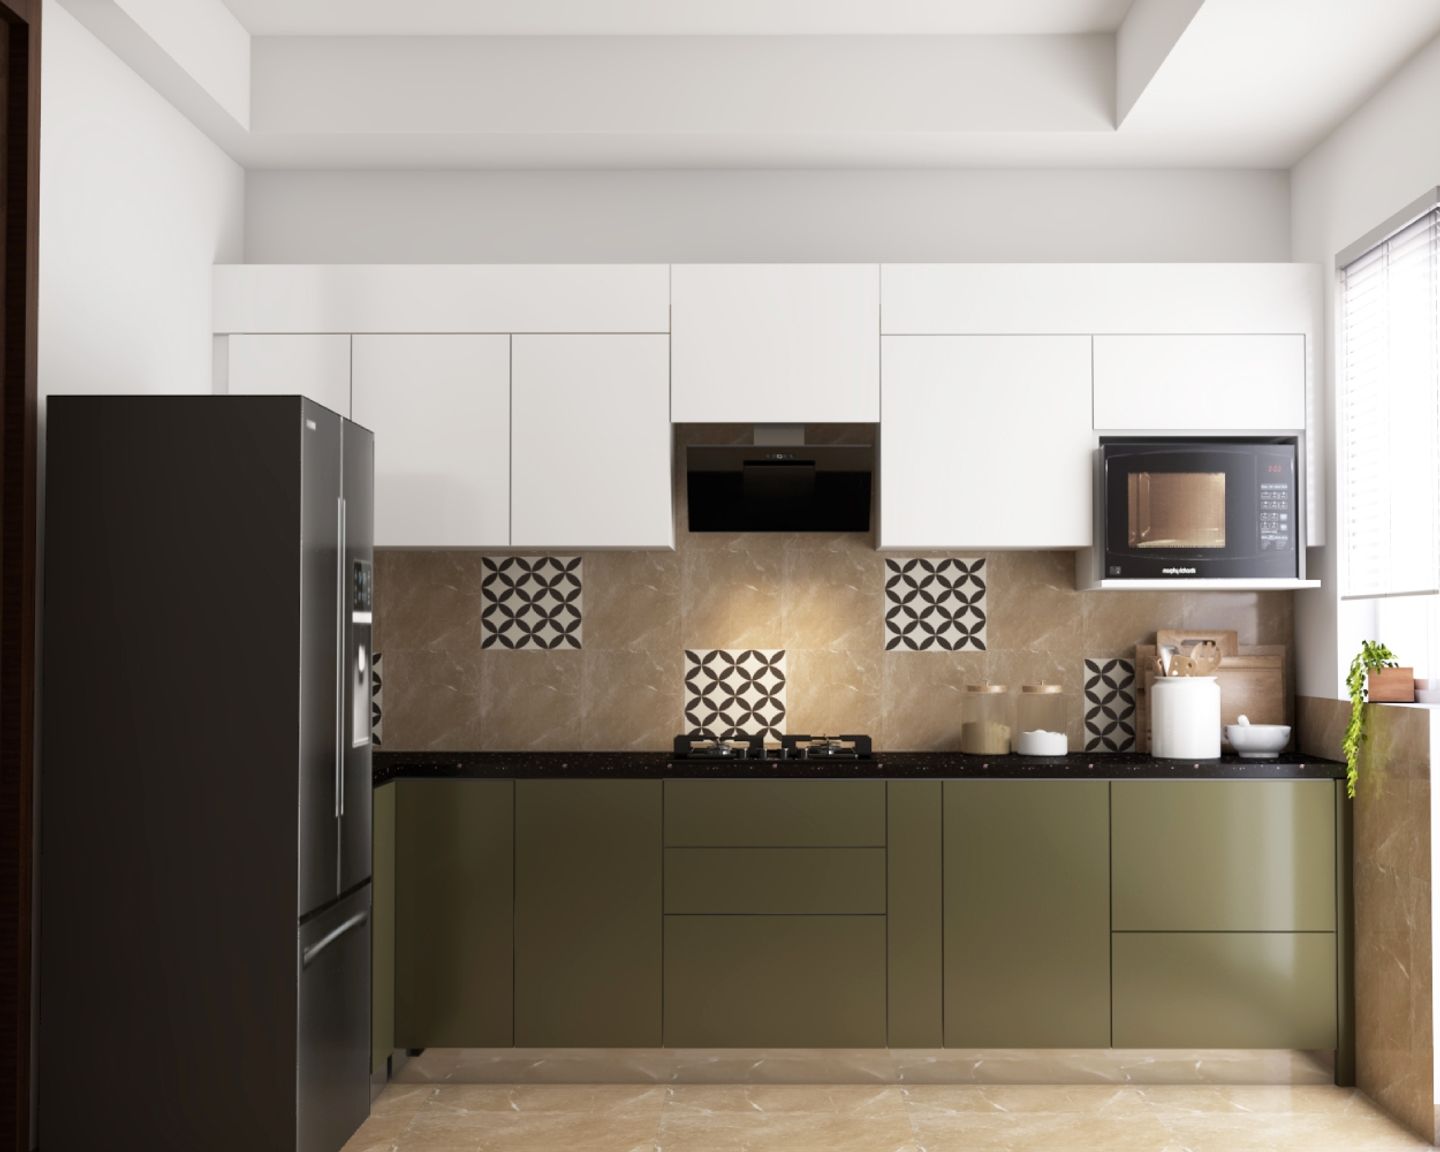 Modular Parallel Kitchen Design With Green And Frosty White Cabinets - Livspace